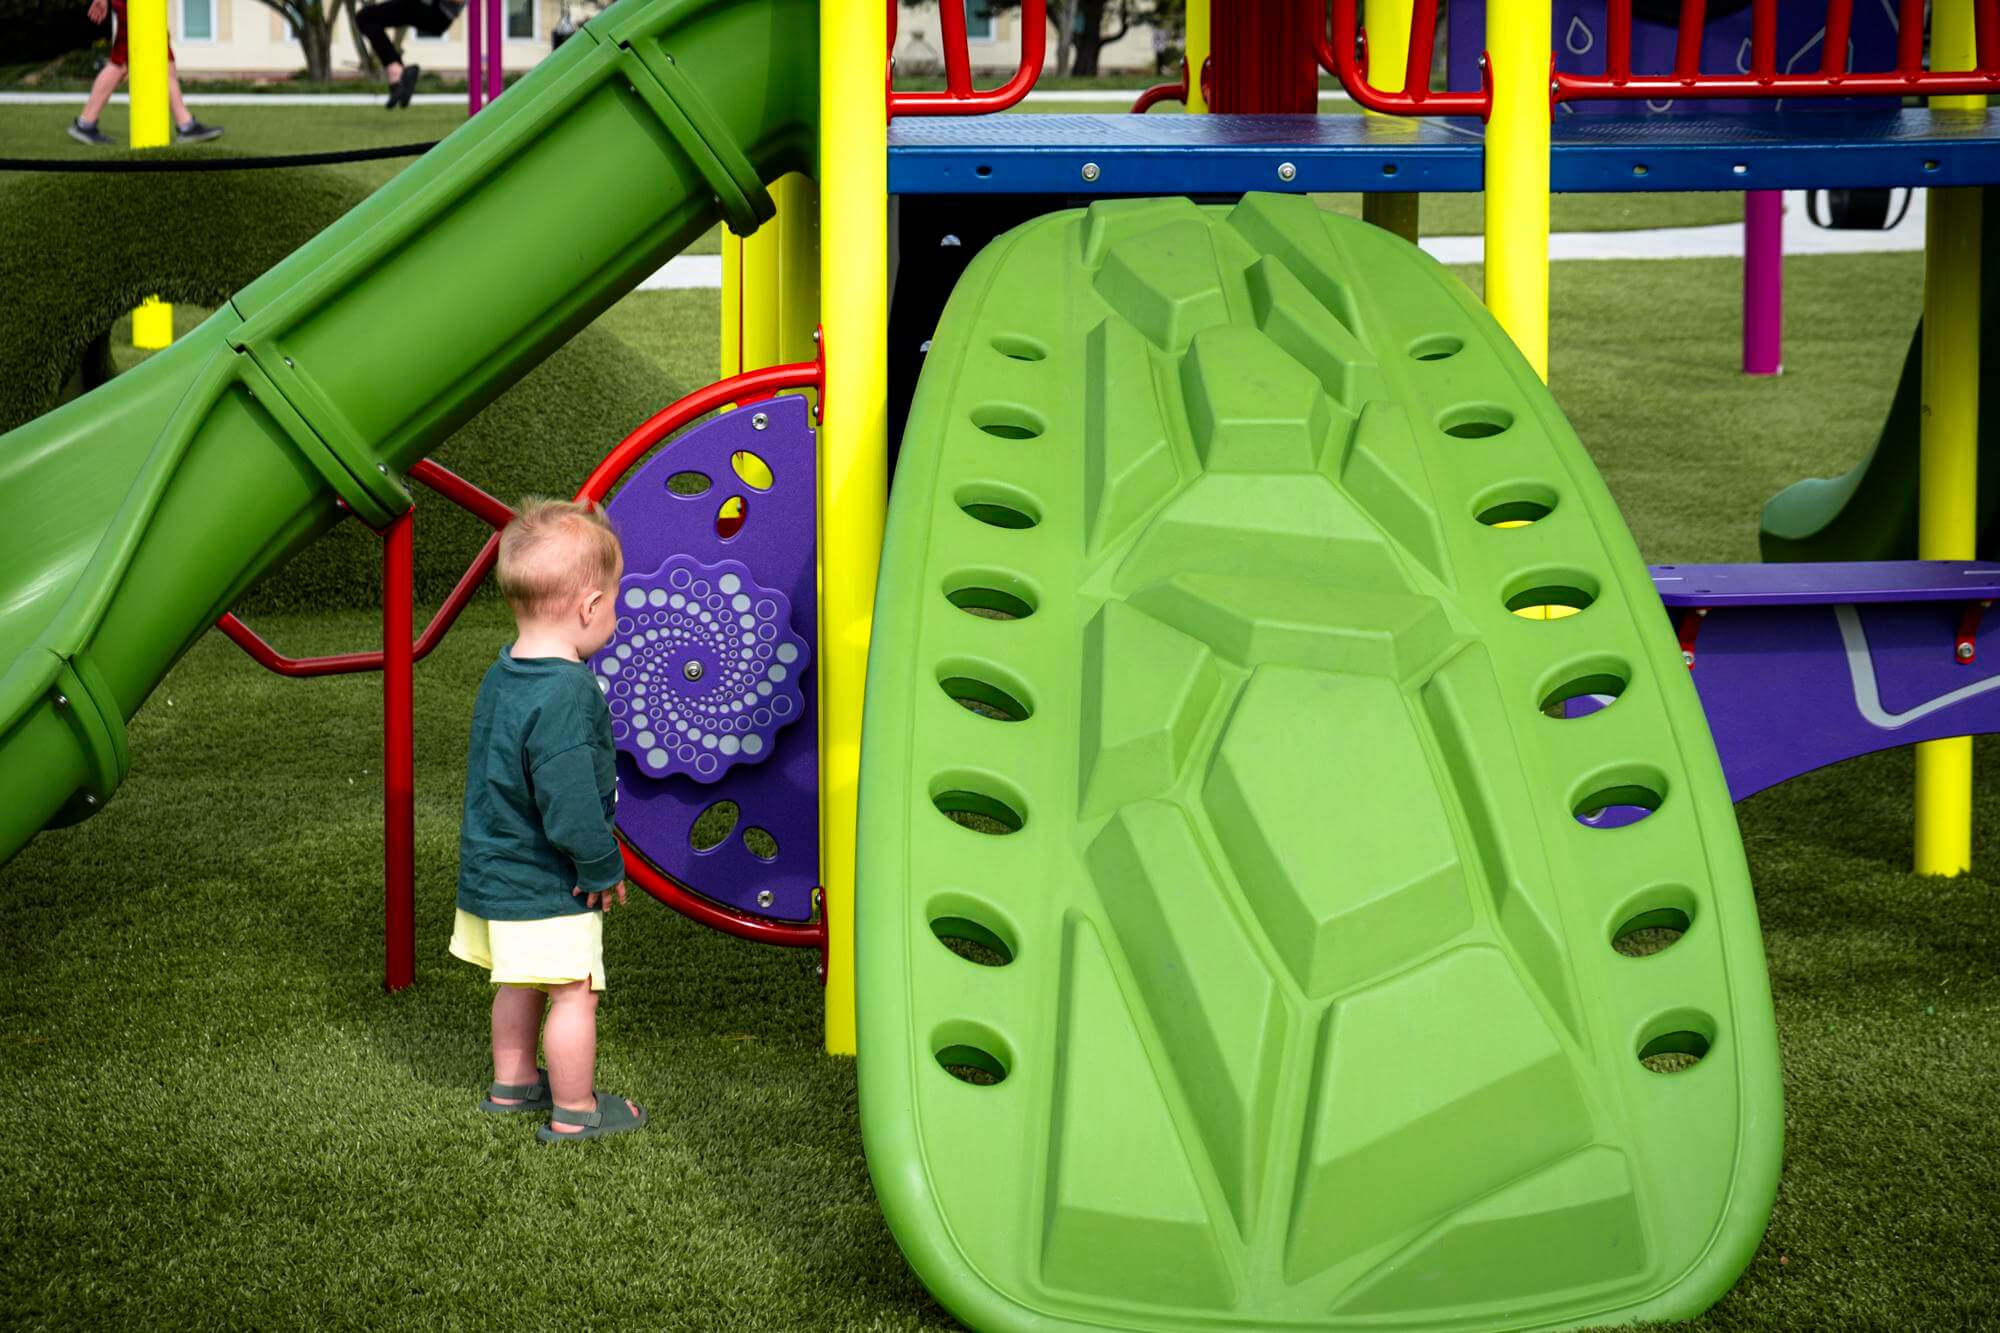 Child looking at an interactive play panel on a playground with artificial grass and a climbing structure.